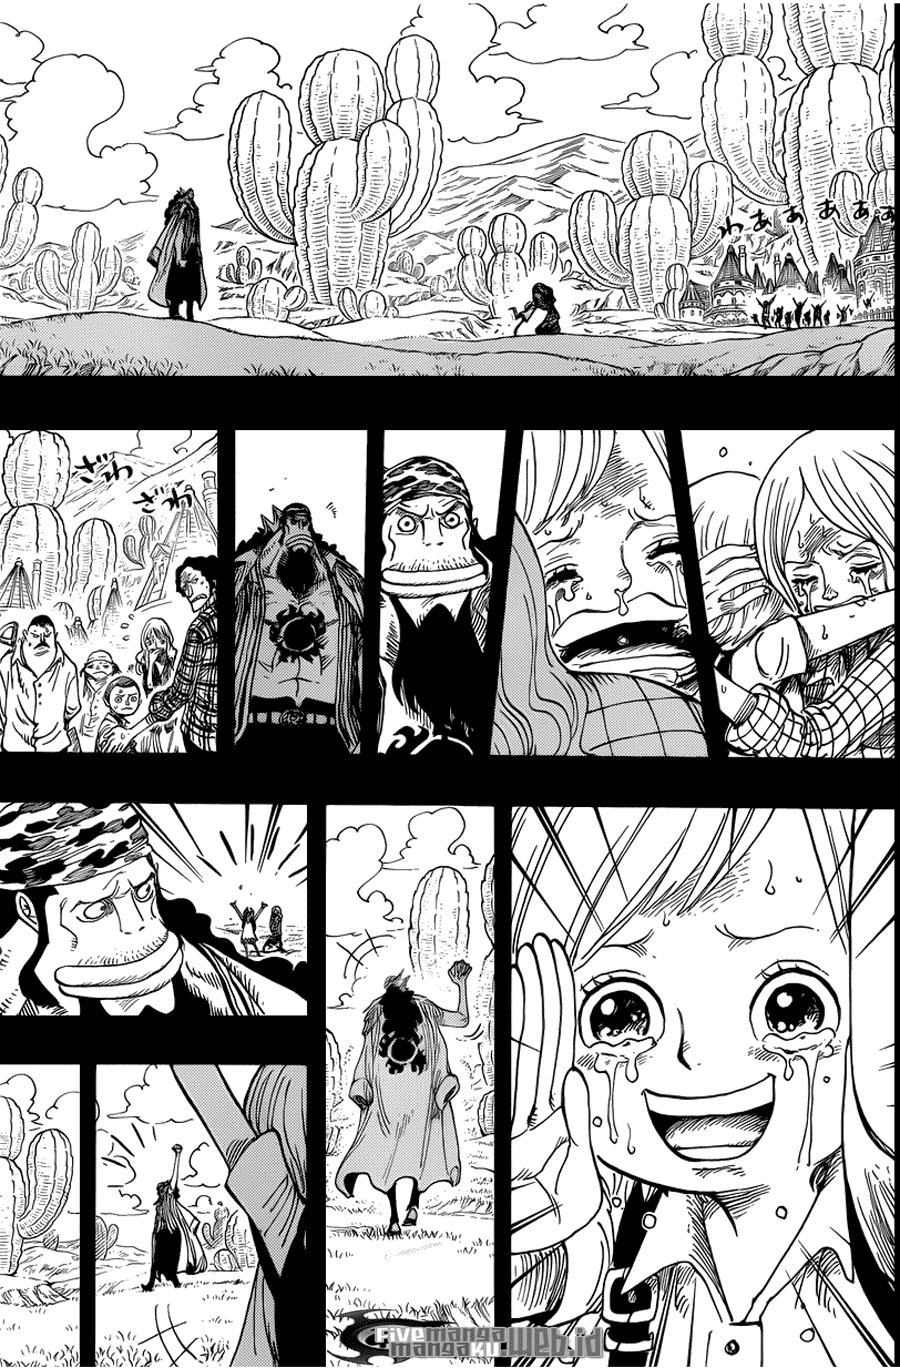 One Piece Chapter 623